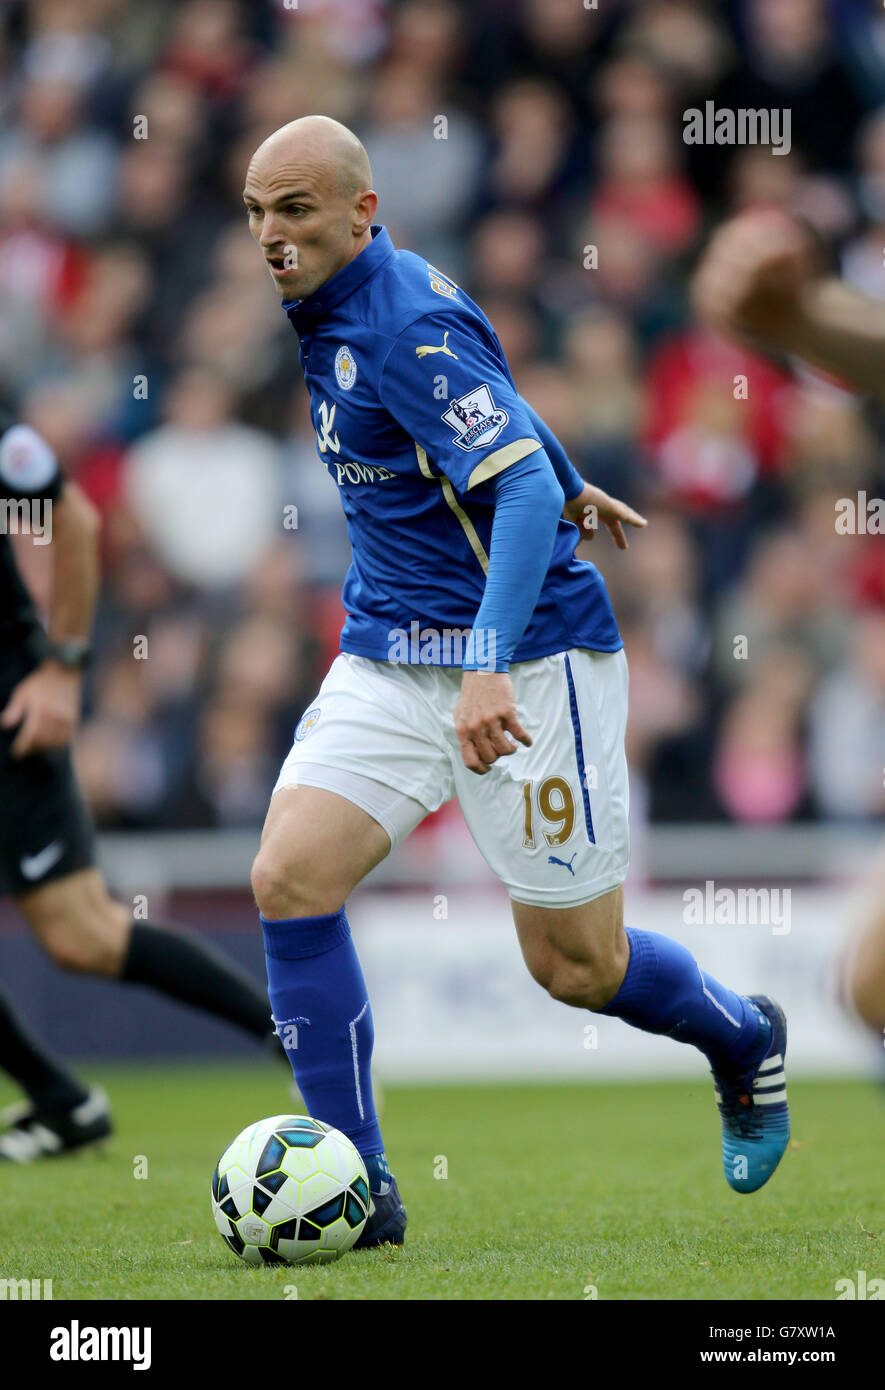 Leicester City's Esteban Cambiasso in action during the Barclays Premier League match at The Stadium of Light, Sunderland. PRESS ASSOCIATION Photo. Picture date: Saturday May 16, 2015. See PA story SOCCER Sunderland. Photo credit should read: Richard Sellers/PA Wire. Maximum 45 images during a match. No video emulation or promotion as 'live'. No use in games, competitions, merchandise, betting or single club/player services. No use with unofficial audio, video, data, fixtures or club/league logos. Stock Photo